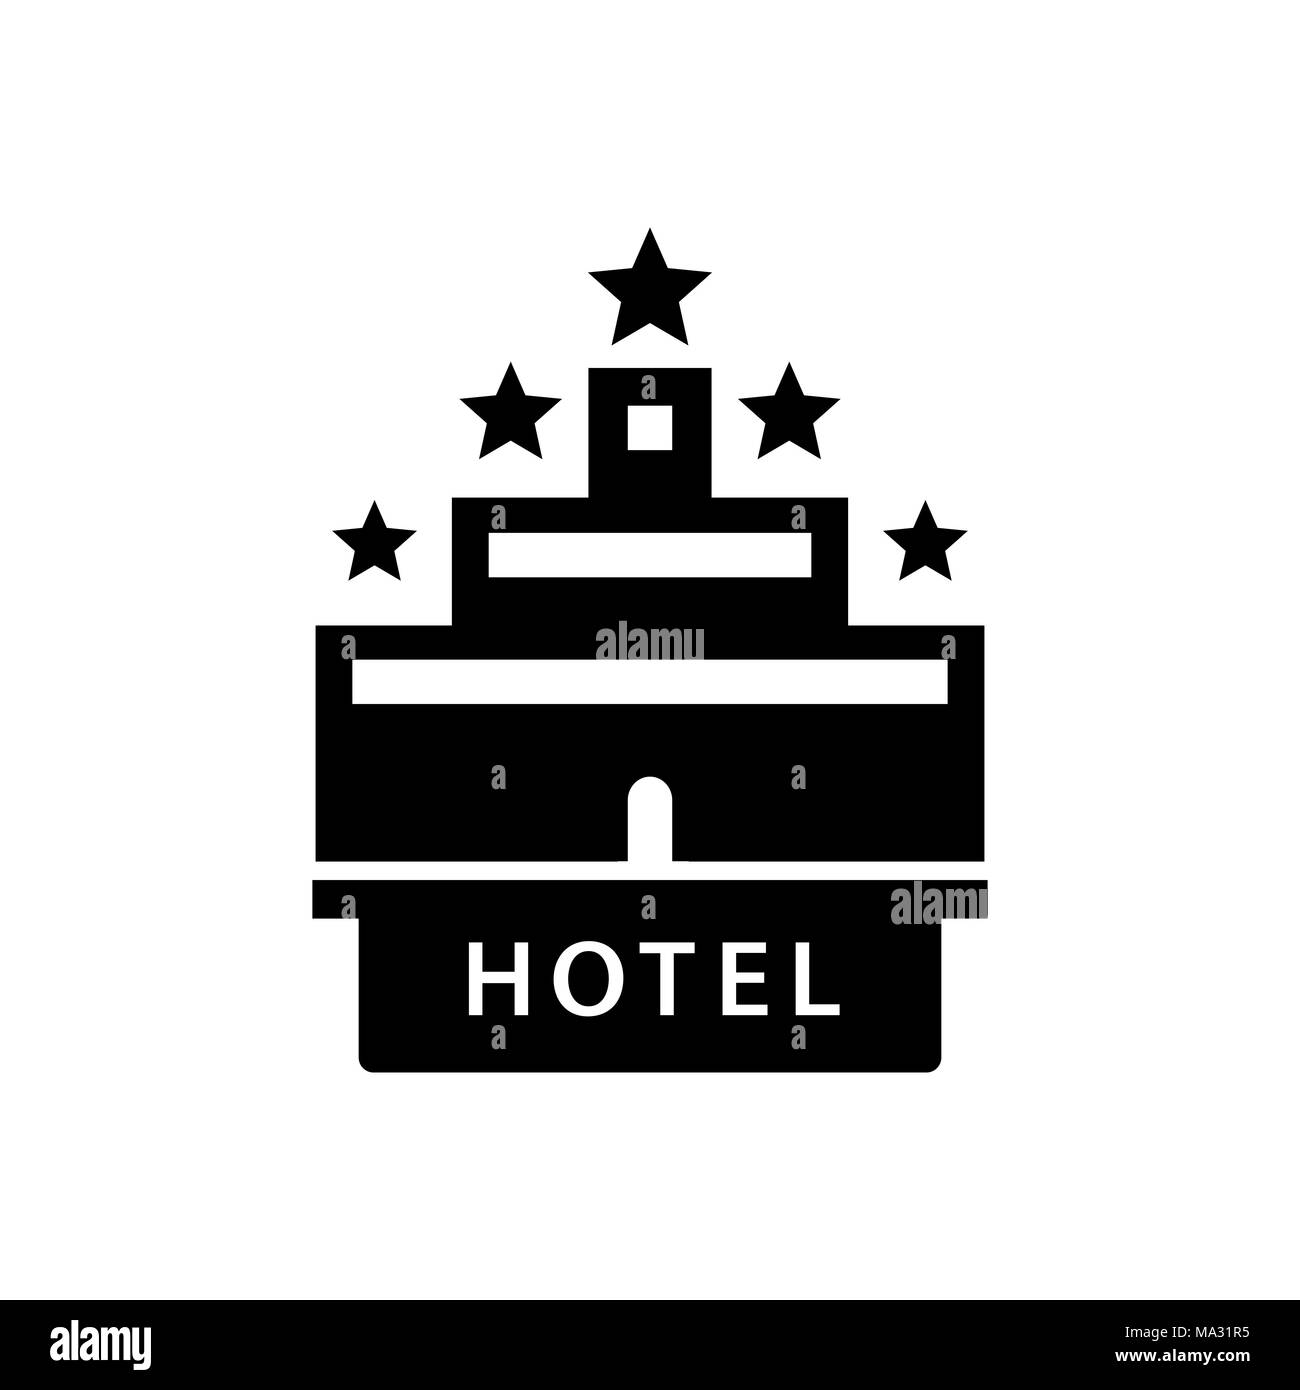 Hotel icon simple flat style illustration. Stock Vector